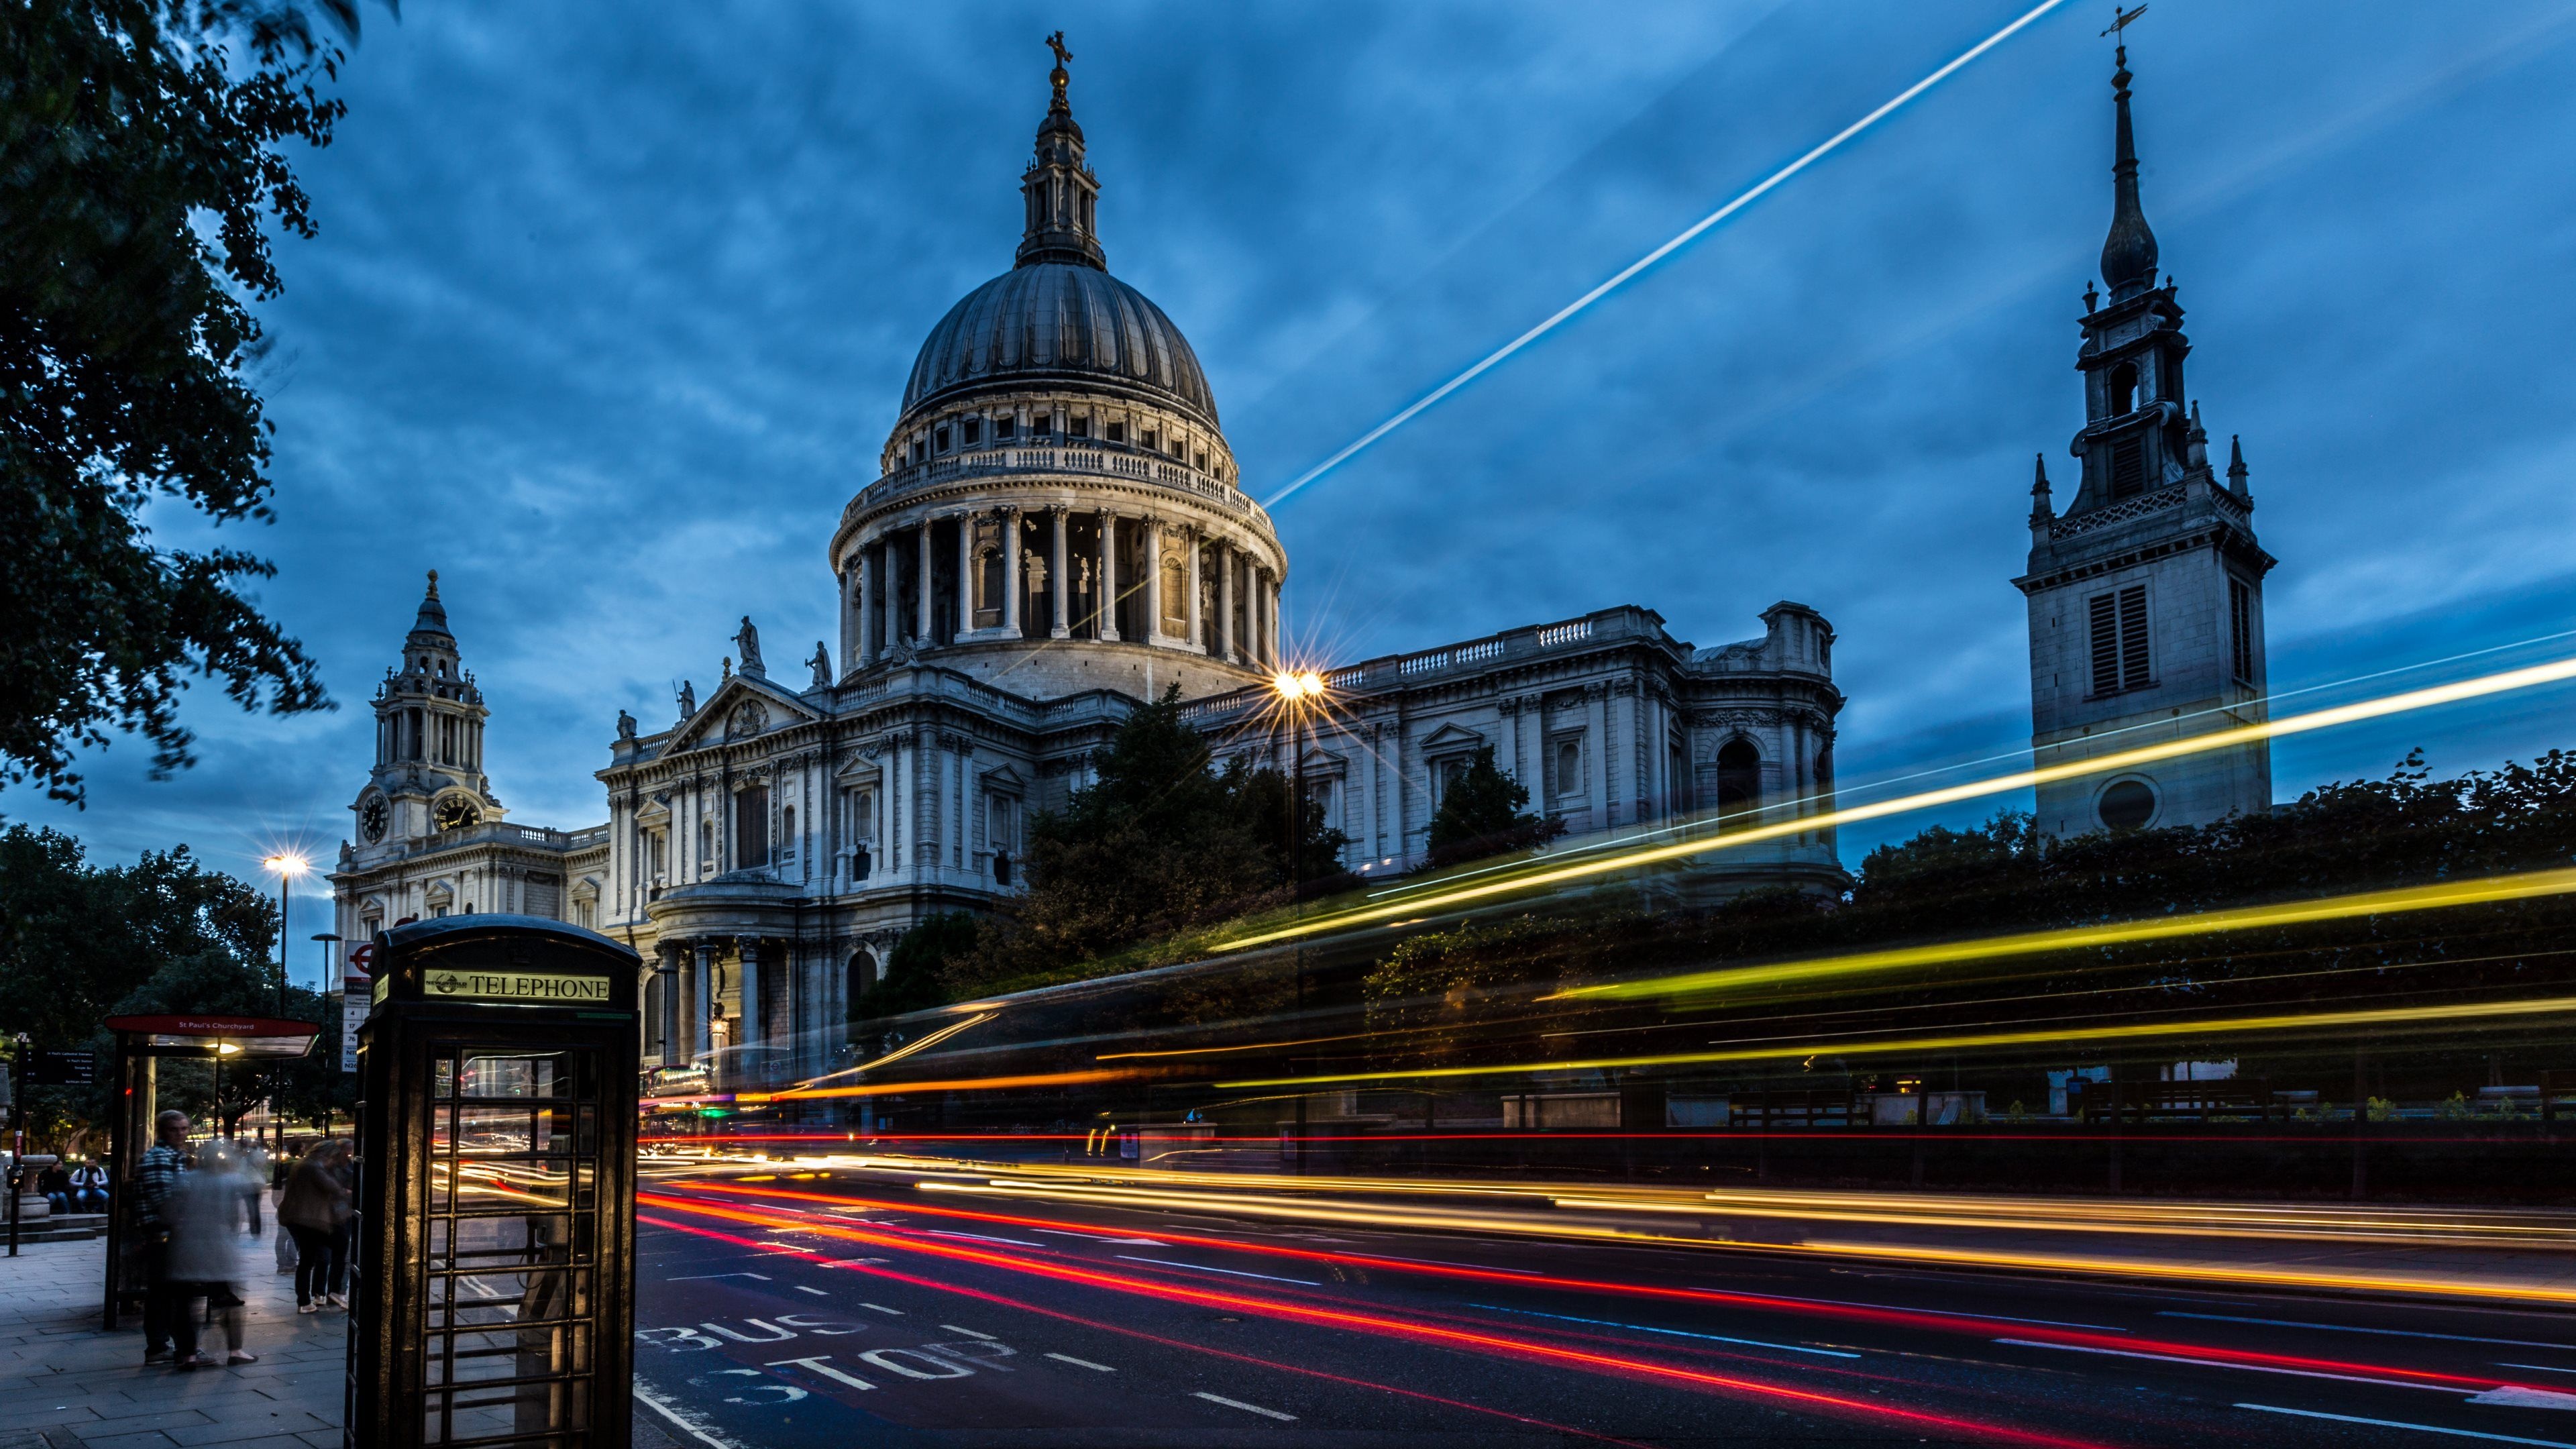 St. Paul's Cathedral Wallpapers (43+ images inside)